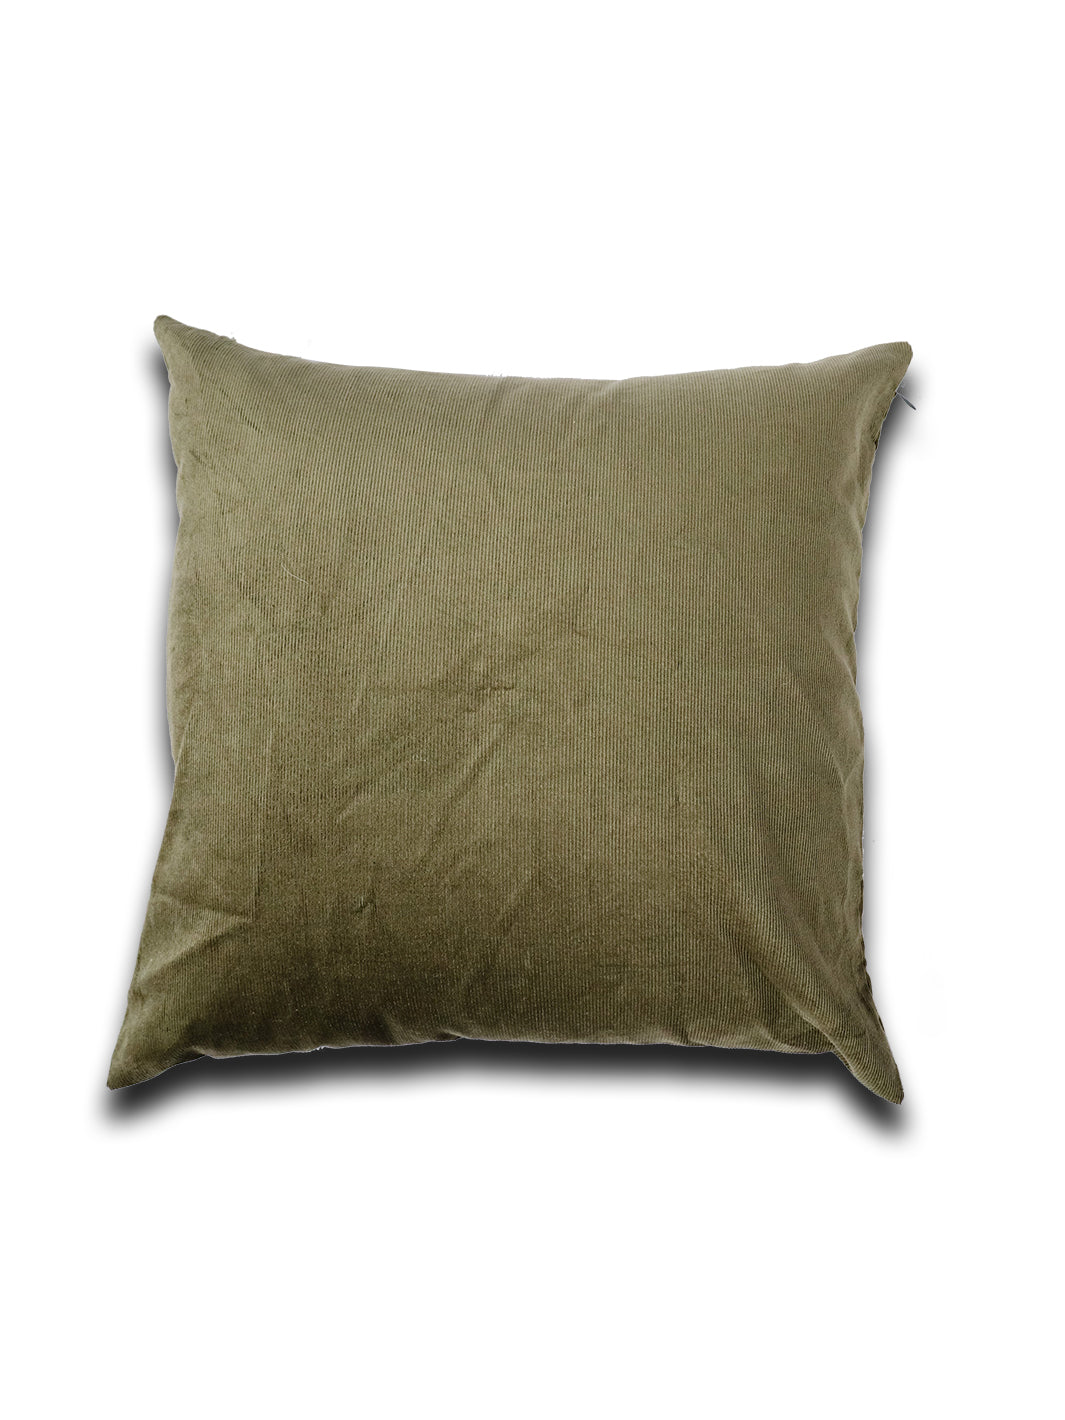 Olive Corduroy Pillow Cover 20" Earthly Comfort Home Decor 739